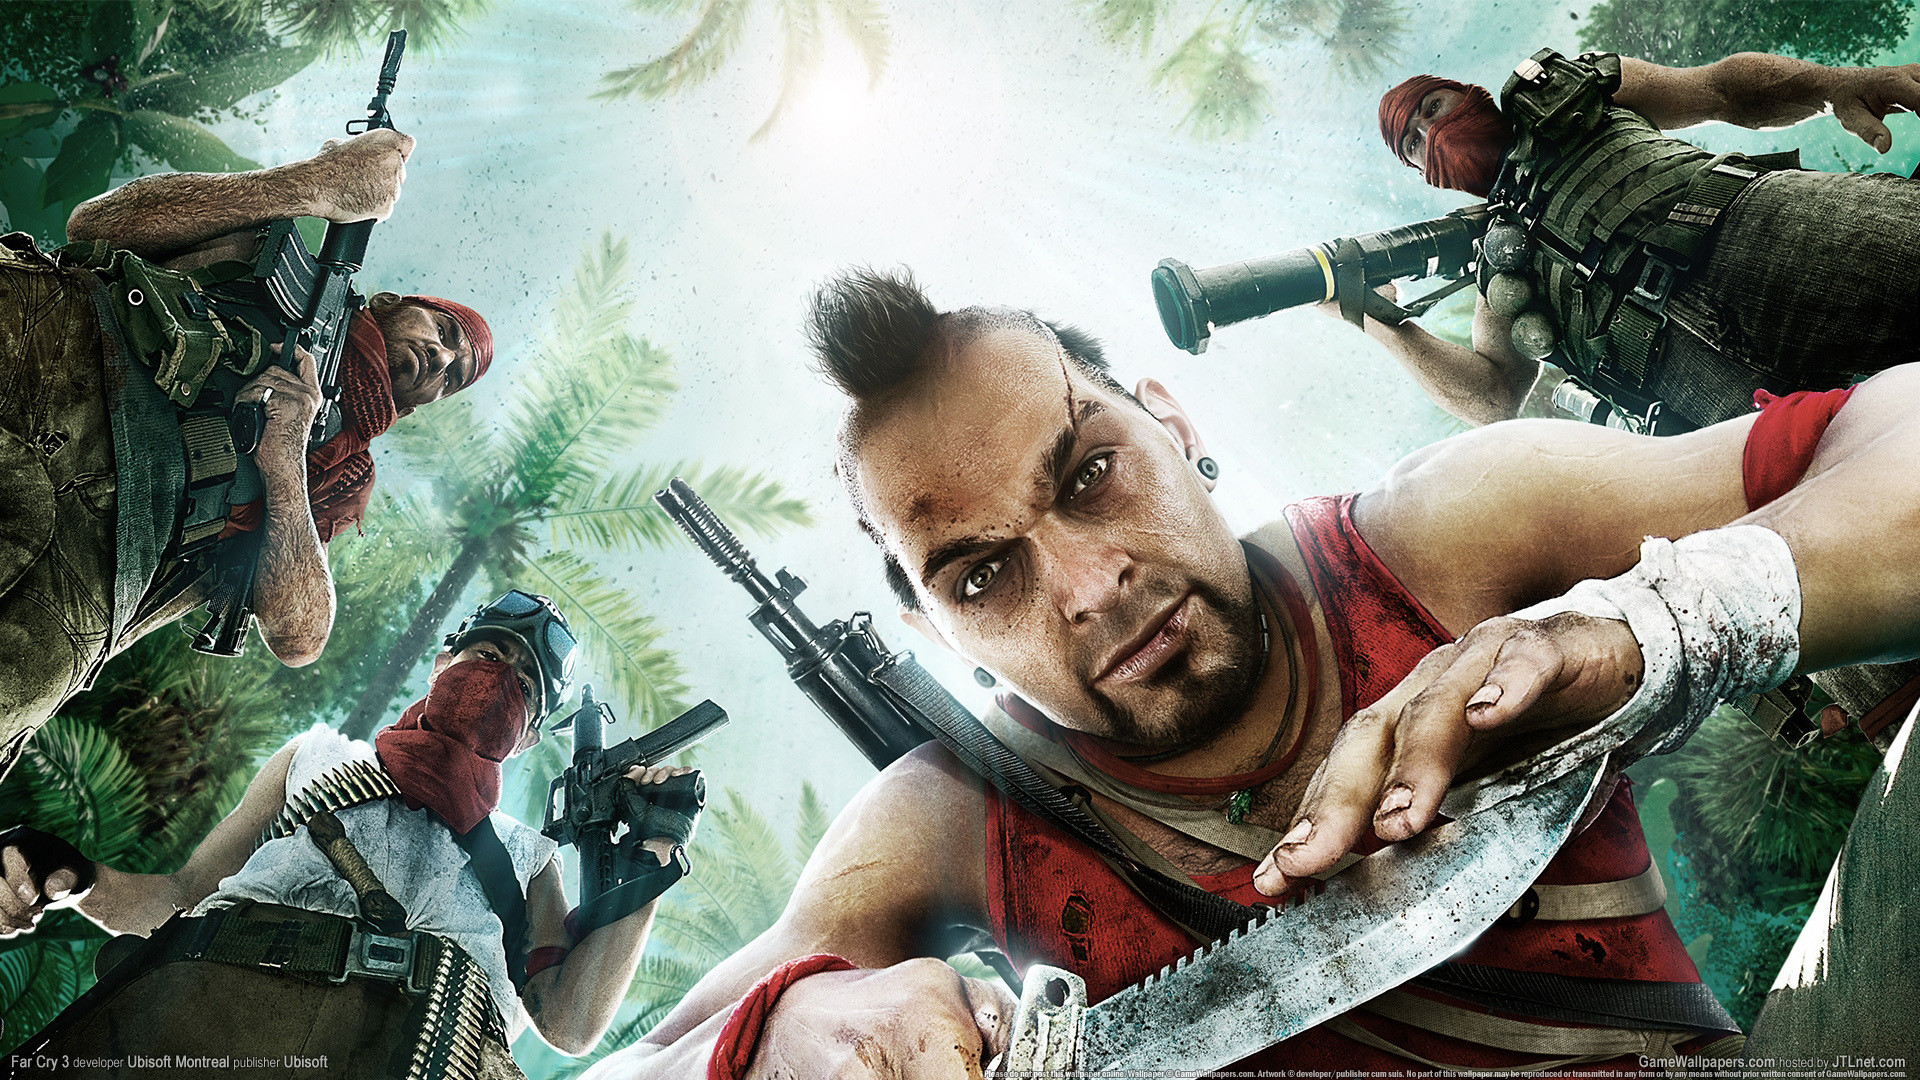 1920x1080 Far Cry 3 Wallpapers HD Download 